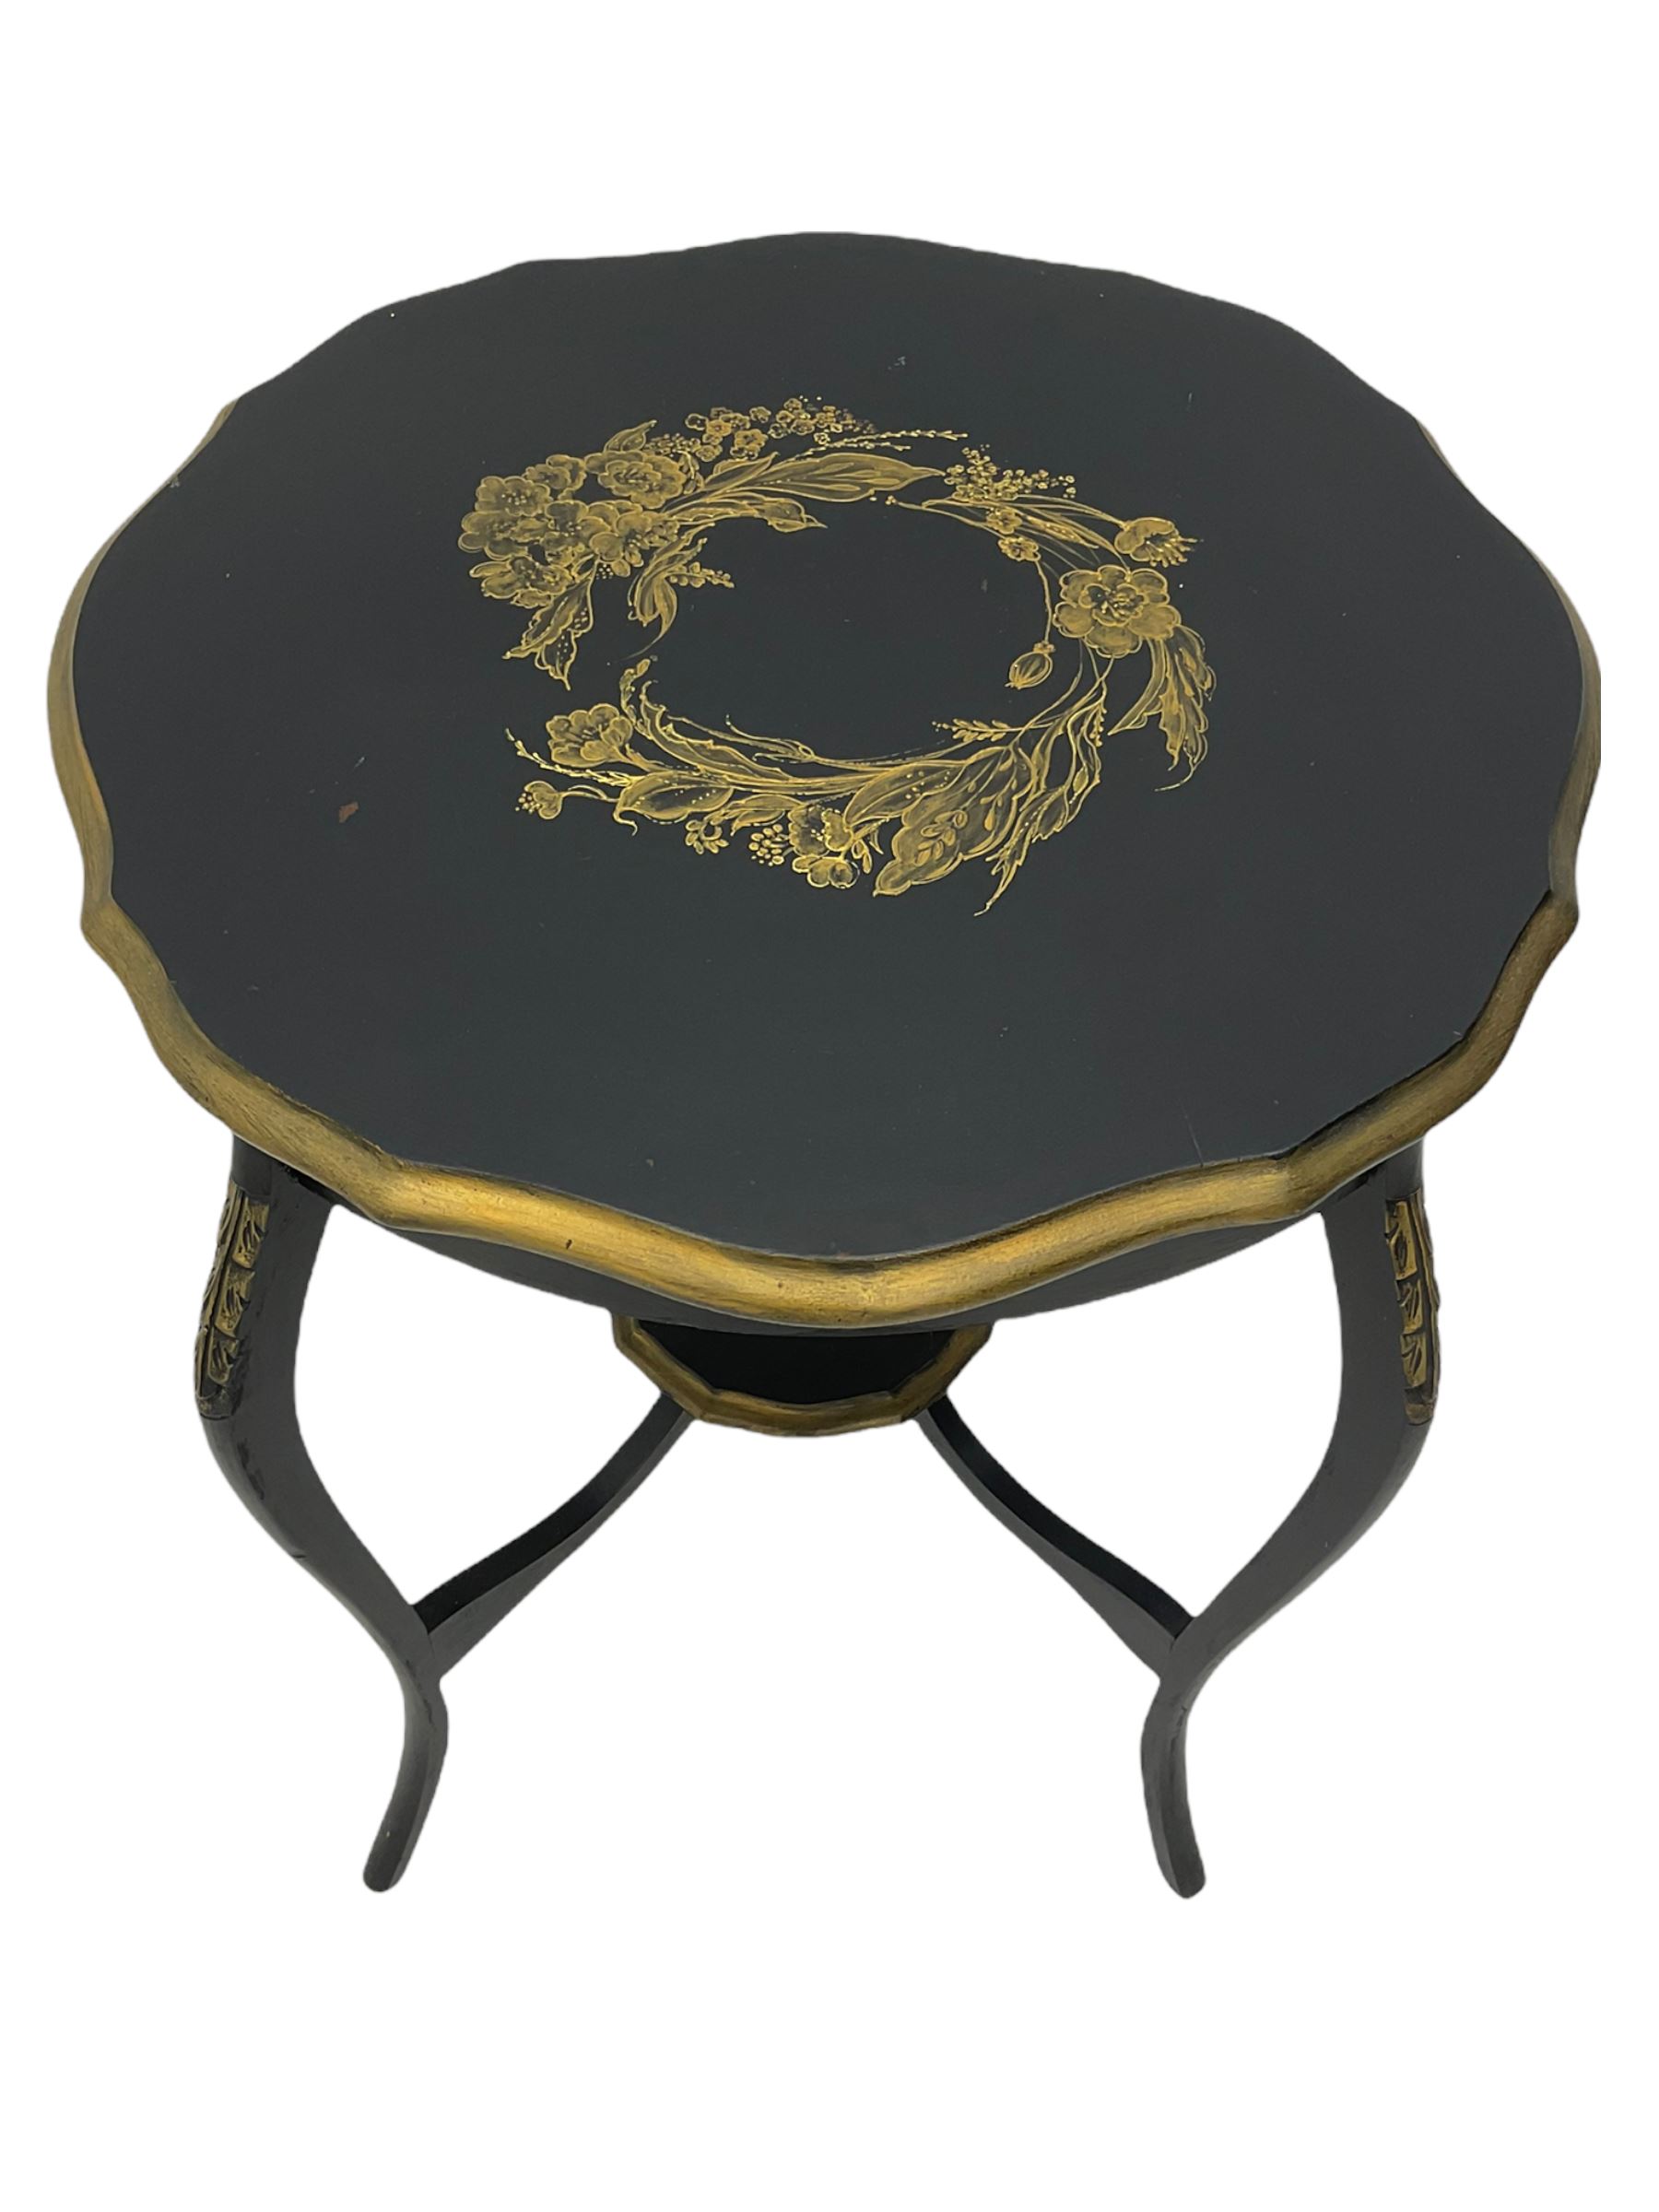 Early 20th century black painted and gilded centre table - Image 3 of 11